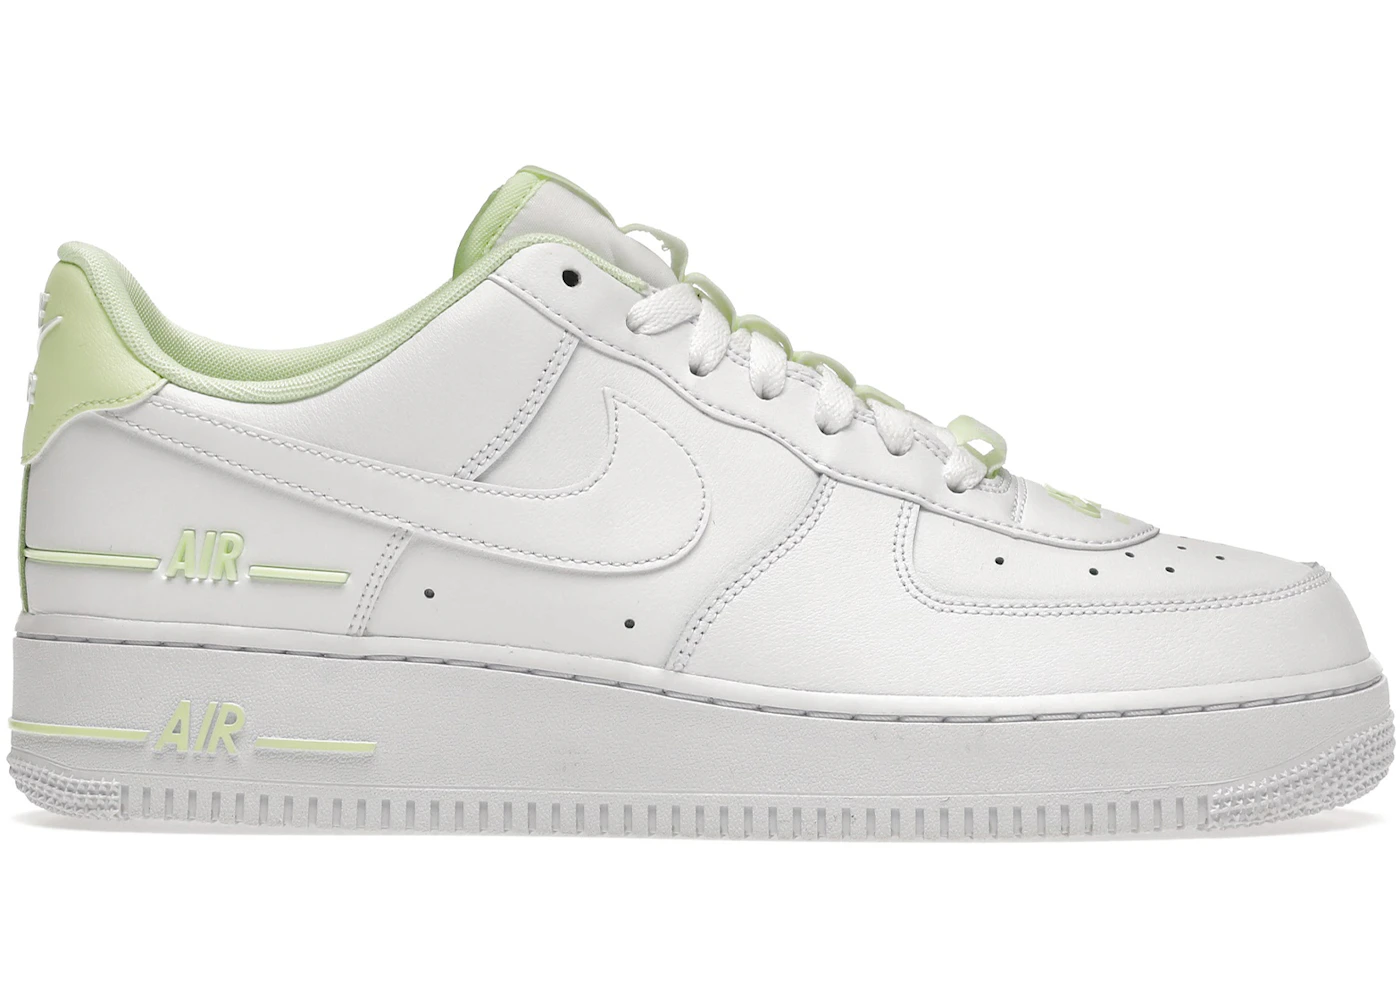 Frugal fringe Compose Nike Air Force 1 Low Double Air Low White Barely Volt - CJ1379-101 - US